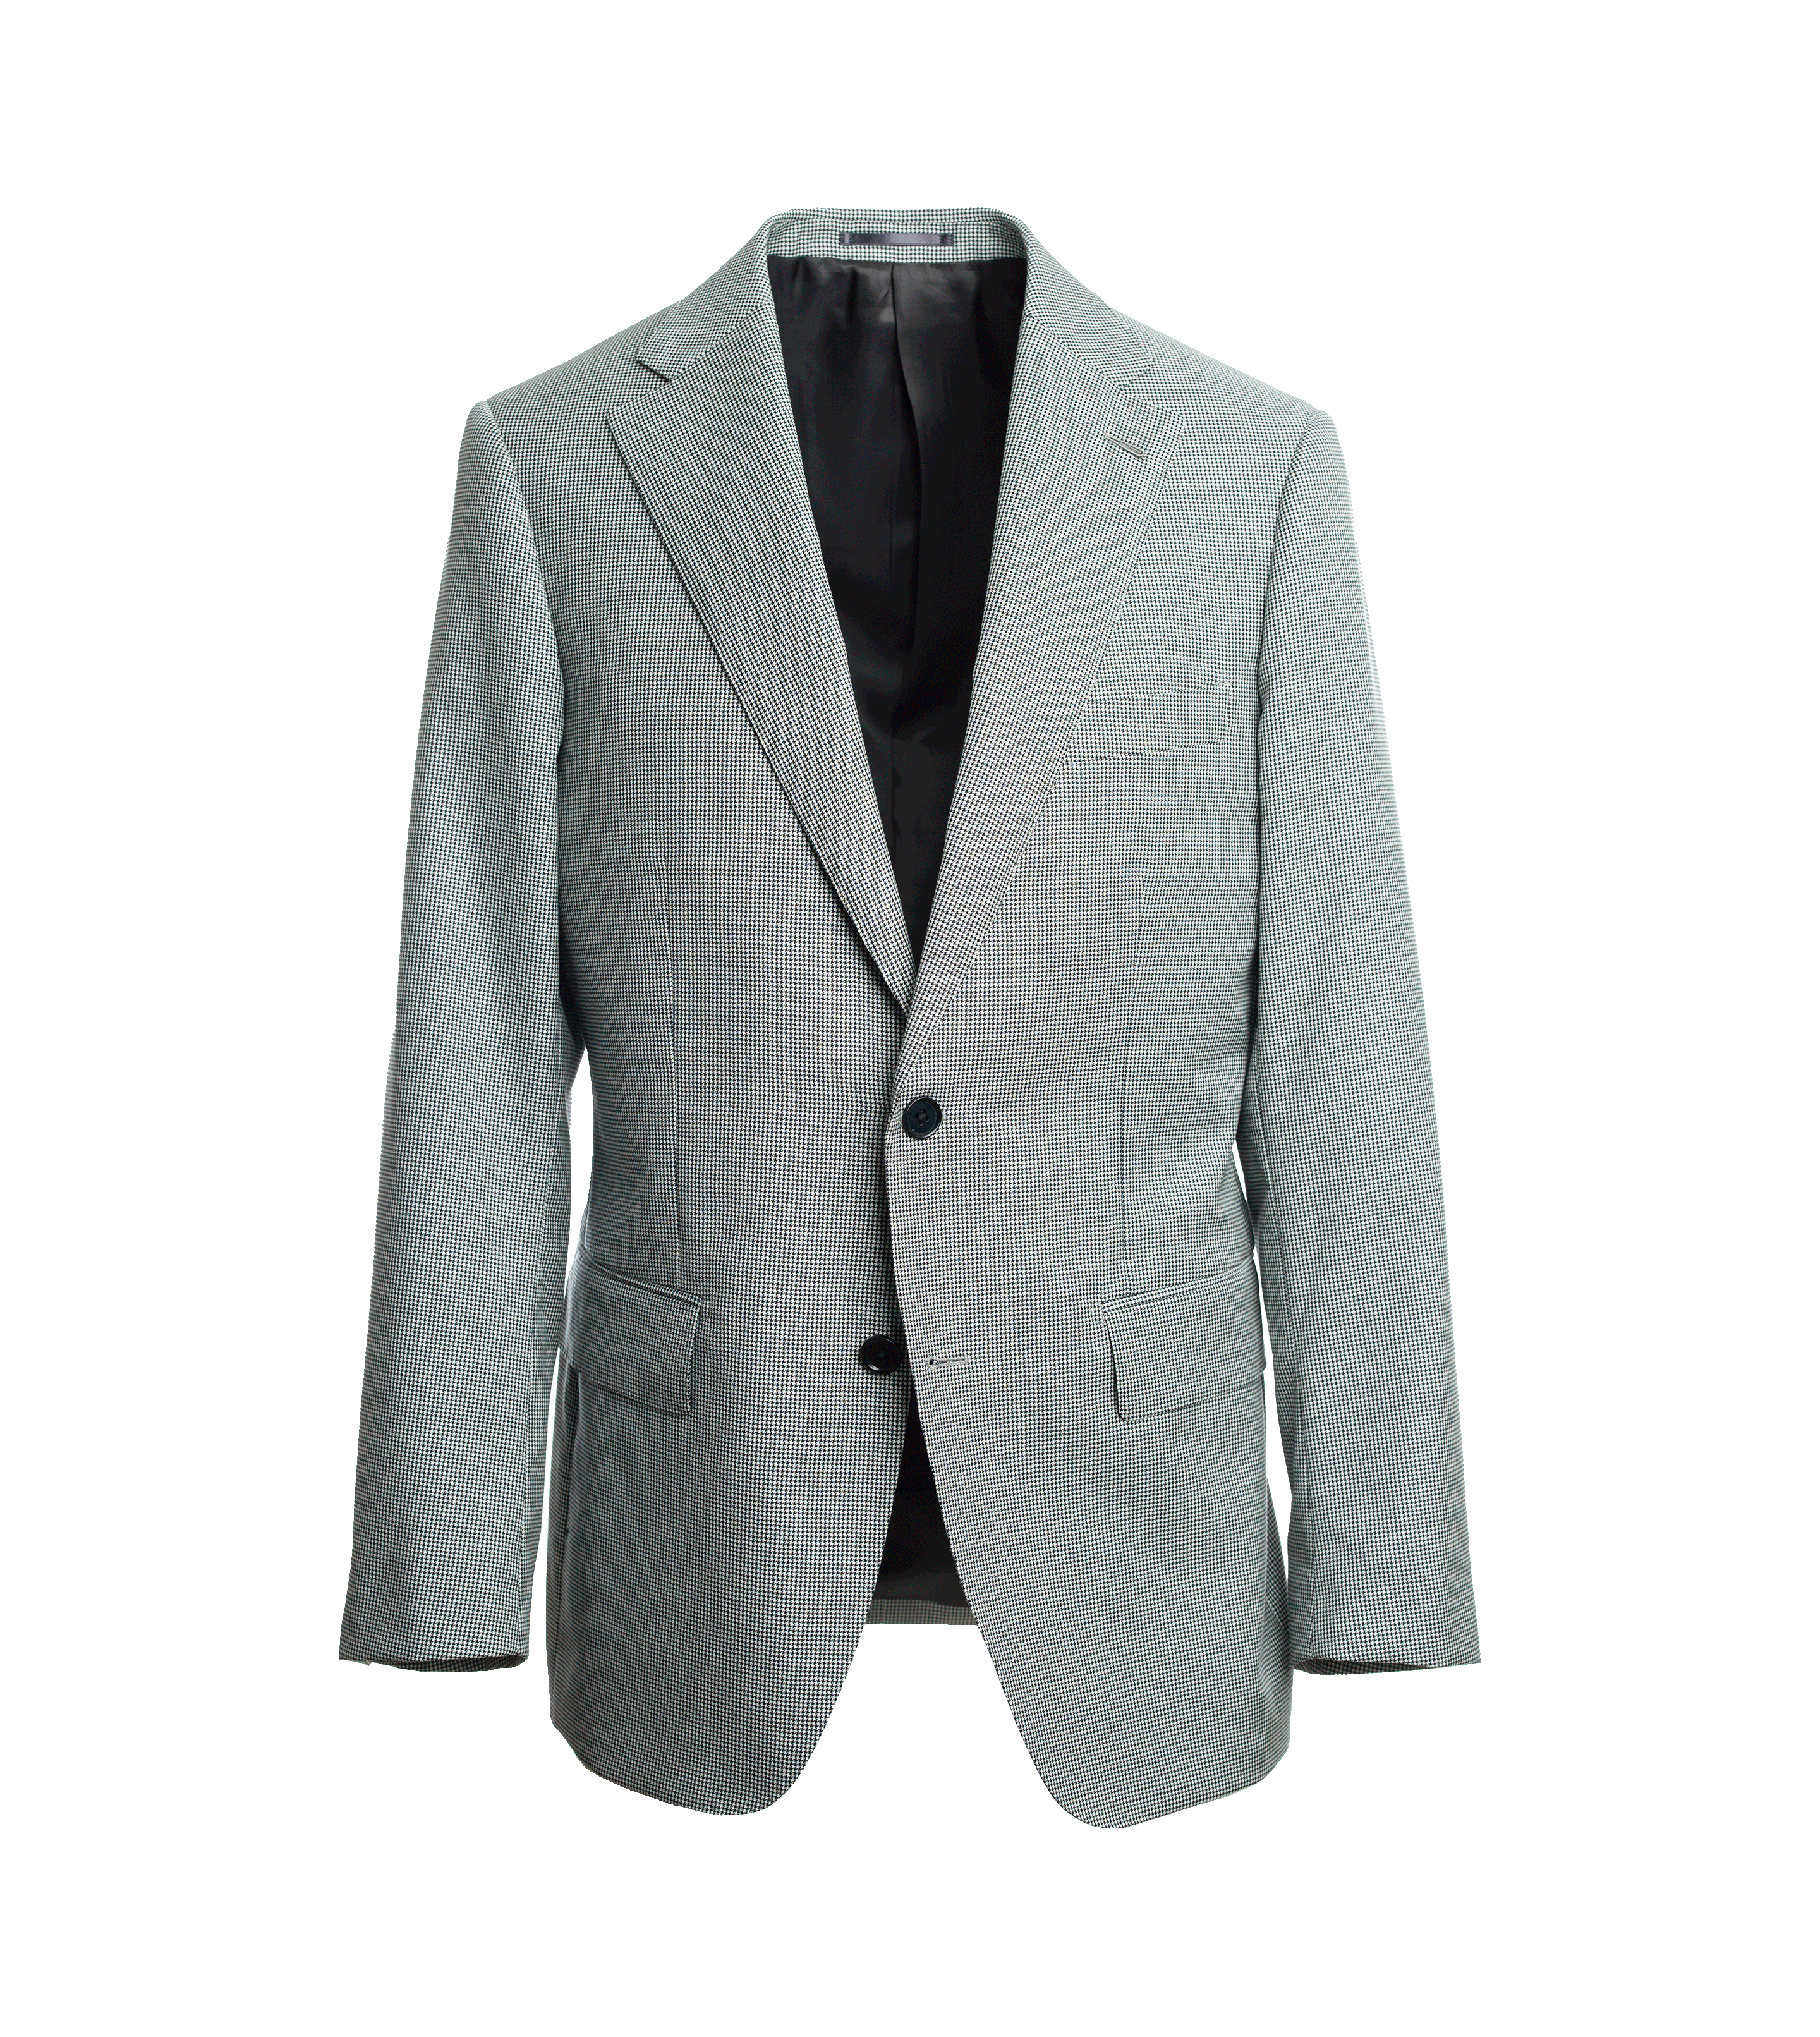 THE HOUNDSTOOTH BLAZER - Capsule Collection Wardrobe